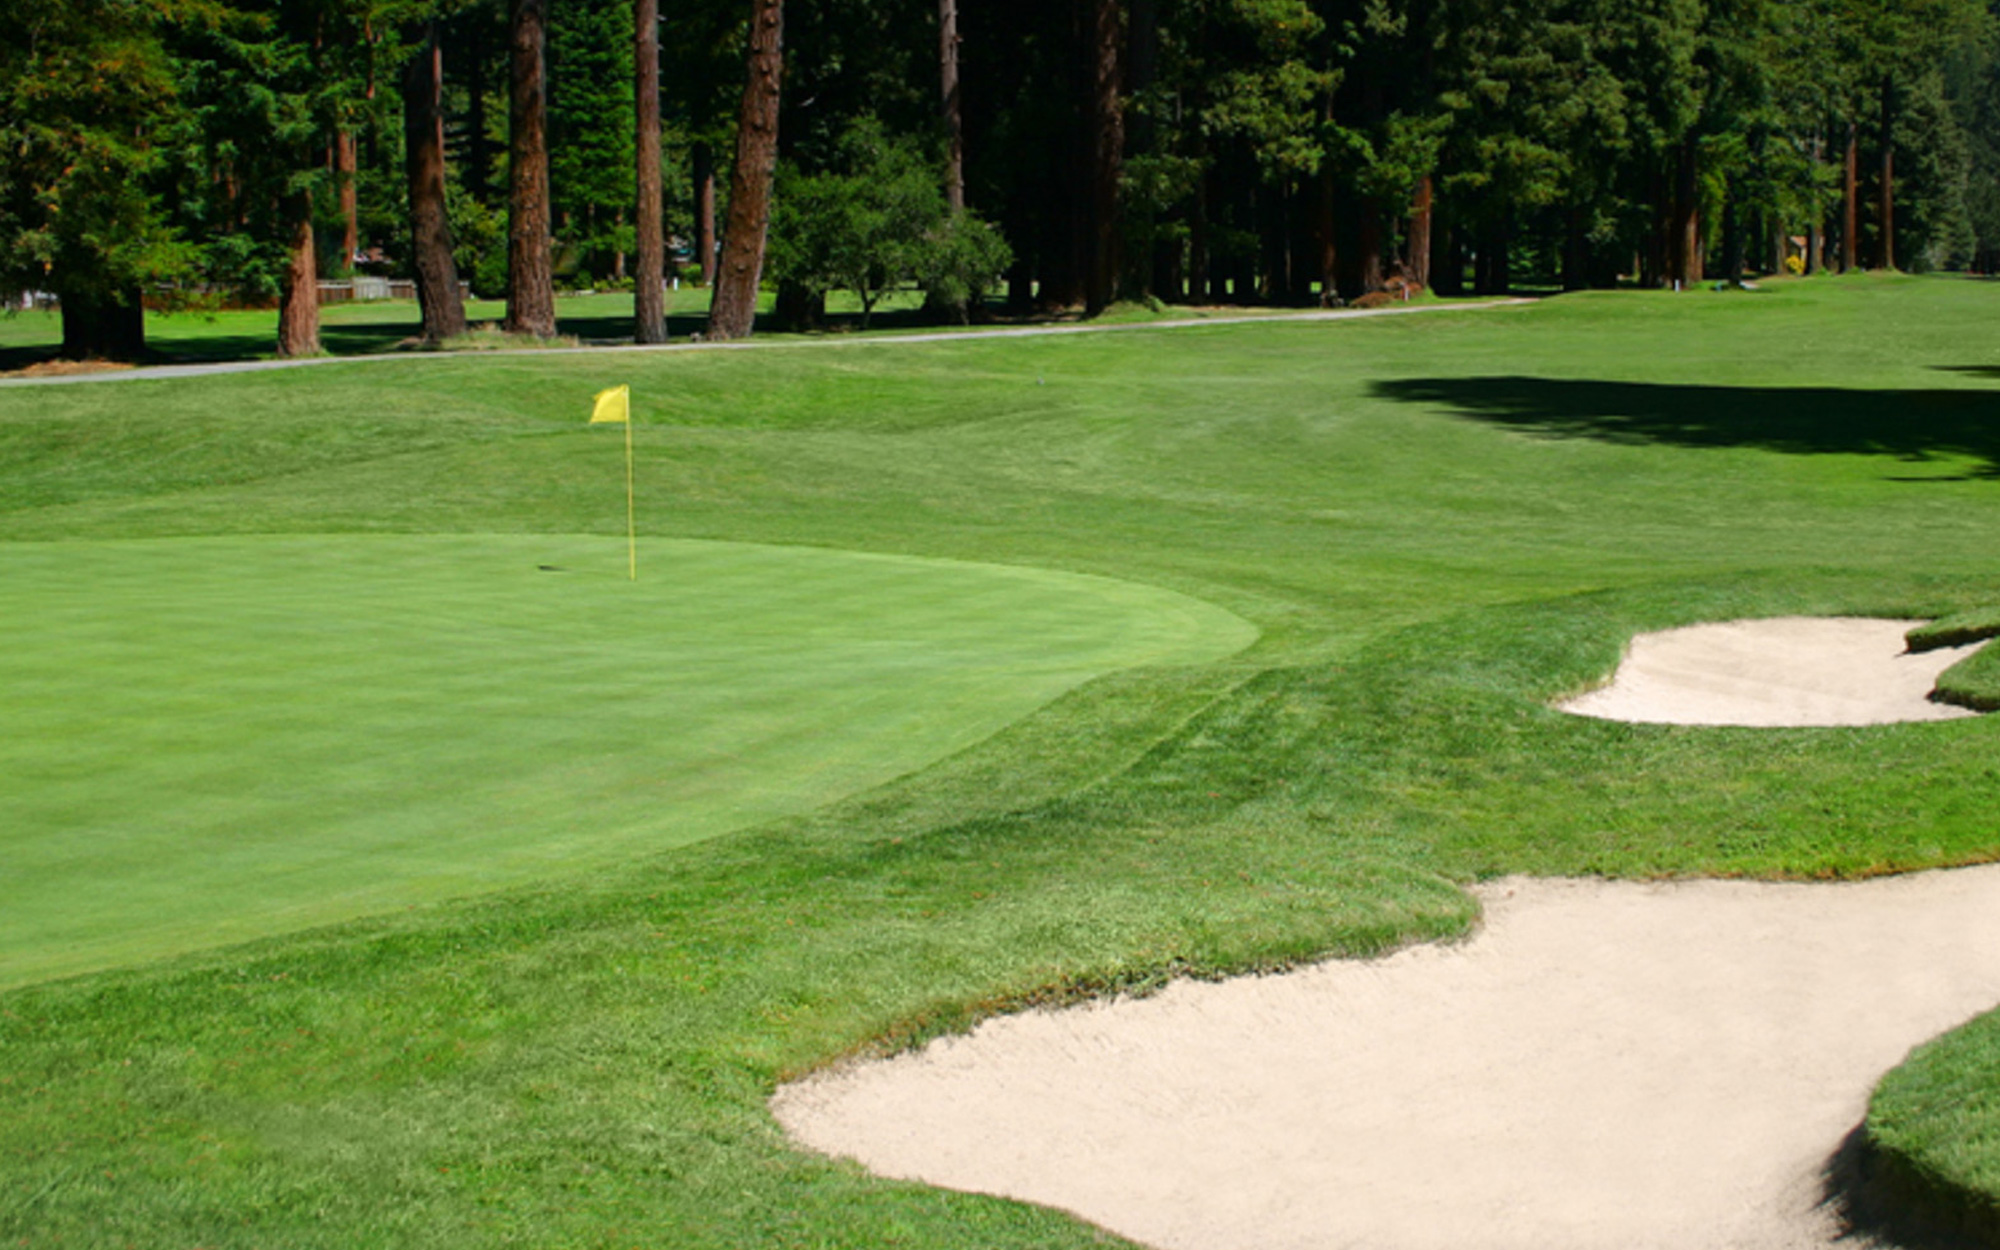 candlewood country club membership fees